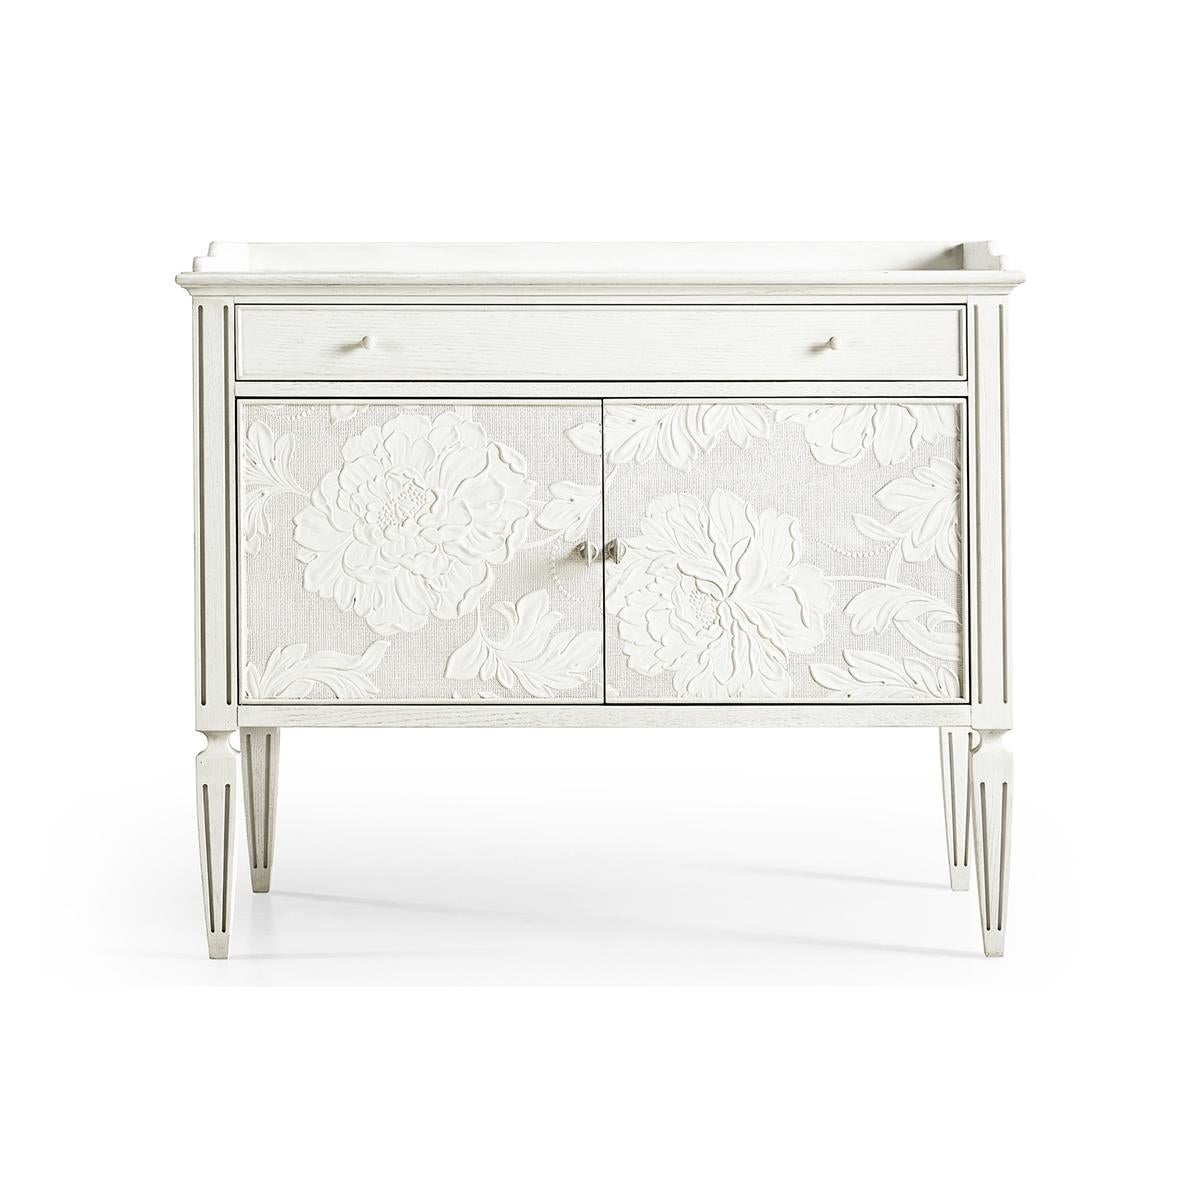 Victorian bedside cabinet, combining the style and aesthetic artistry of Victorian refinement with delicate floral patterns painstakingly crafted combining wallpaper and plaster sculpting techniques. With a three quarter galleried top, single long